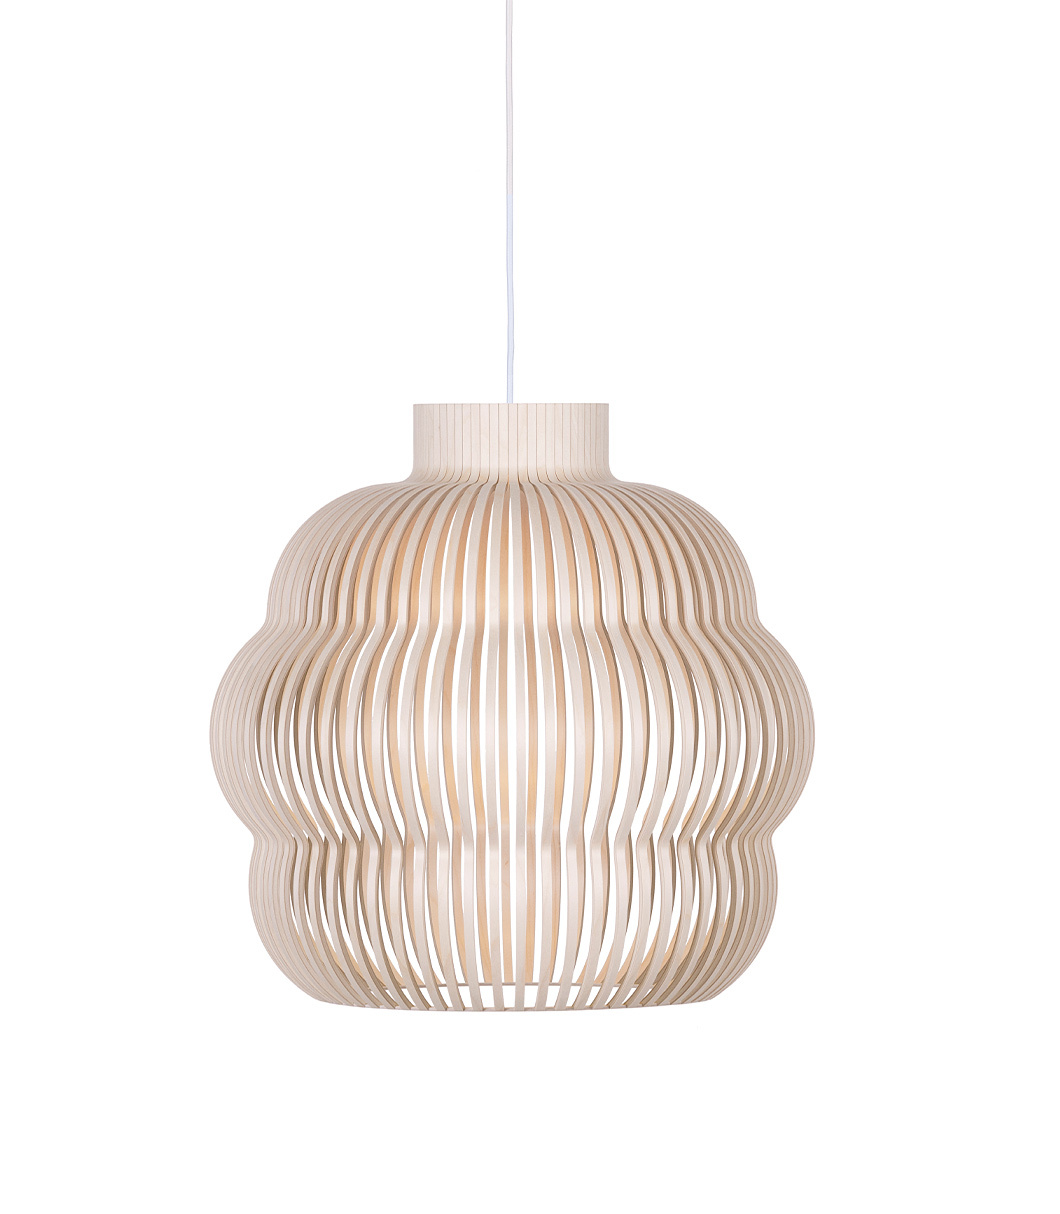 Kumulo 5200 pendant lamp is available in natural birch